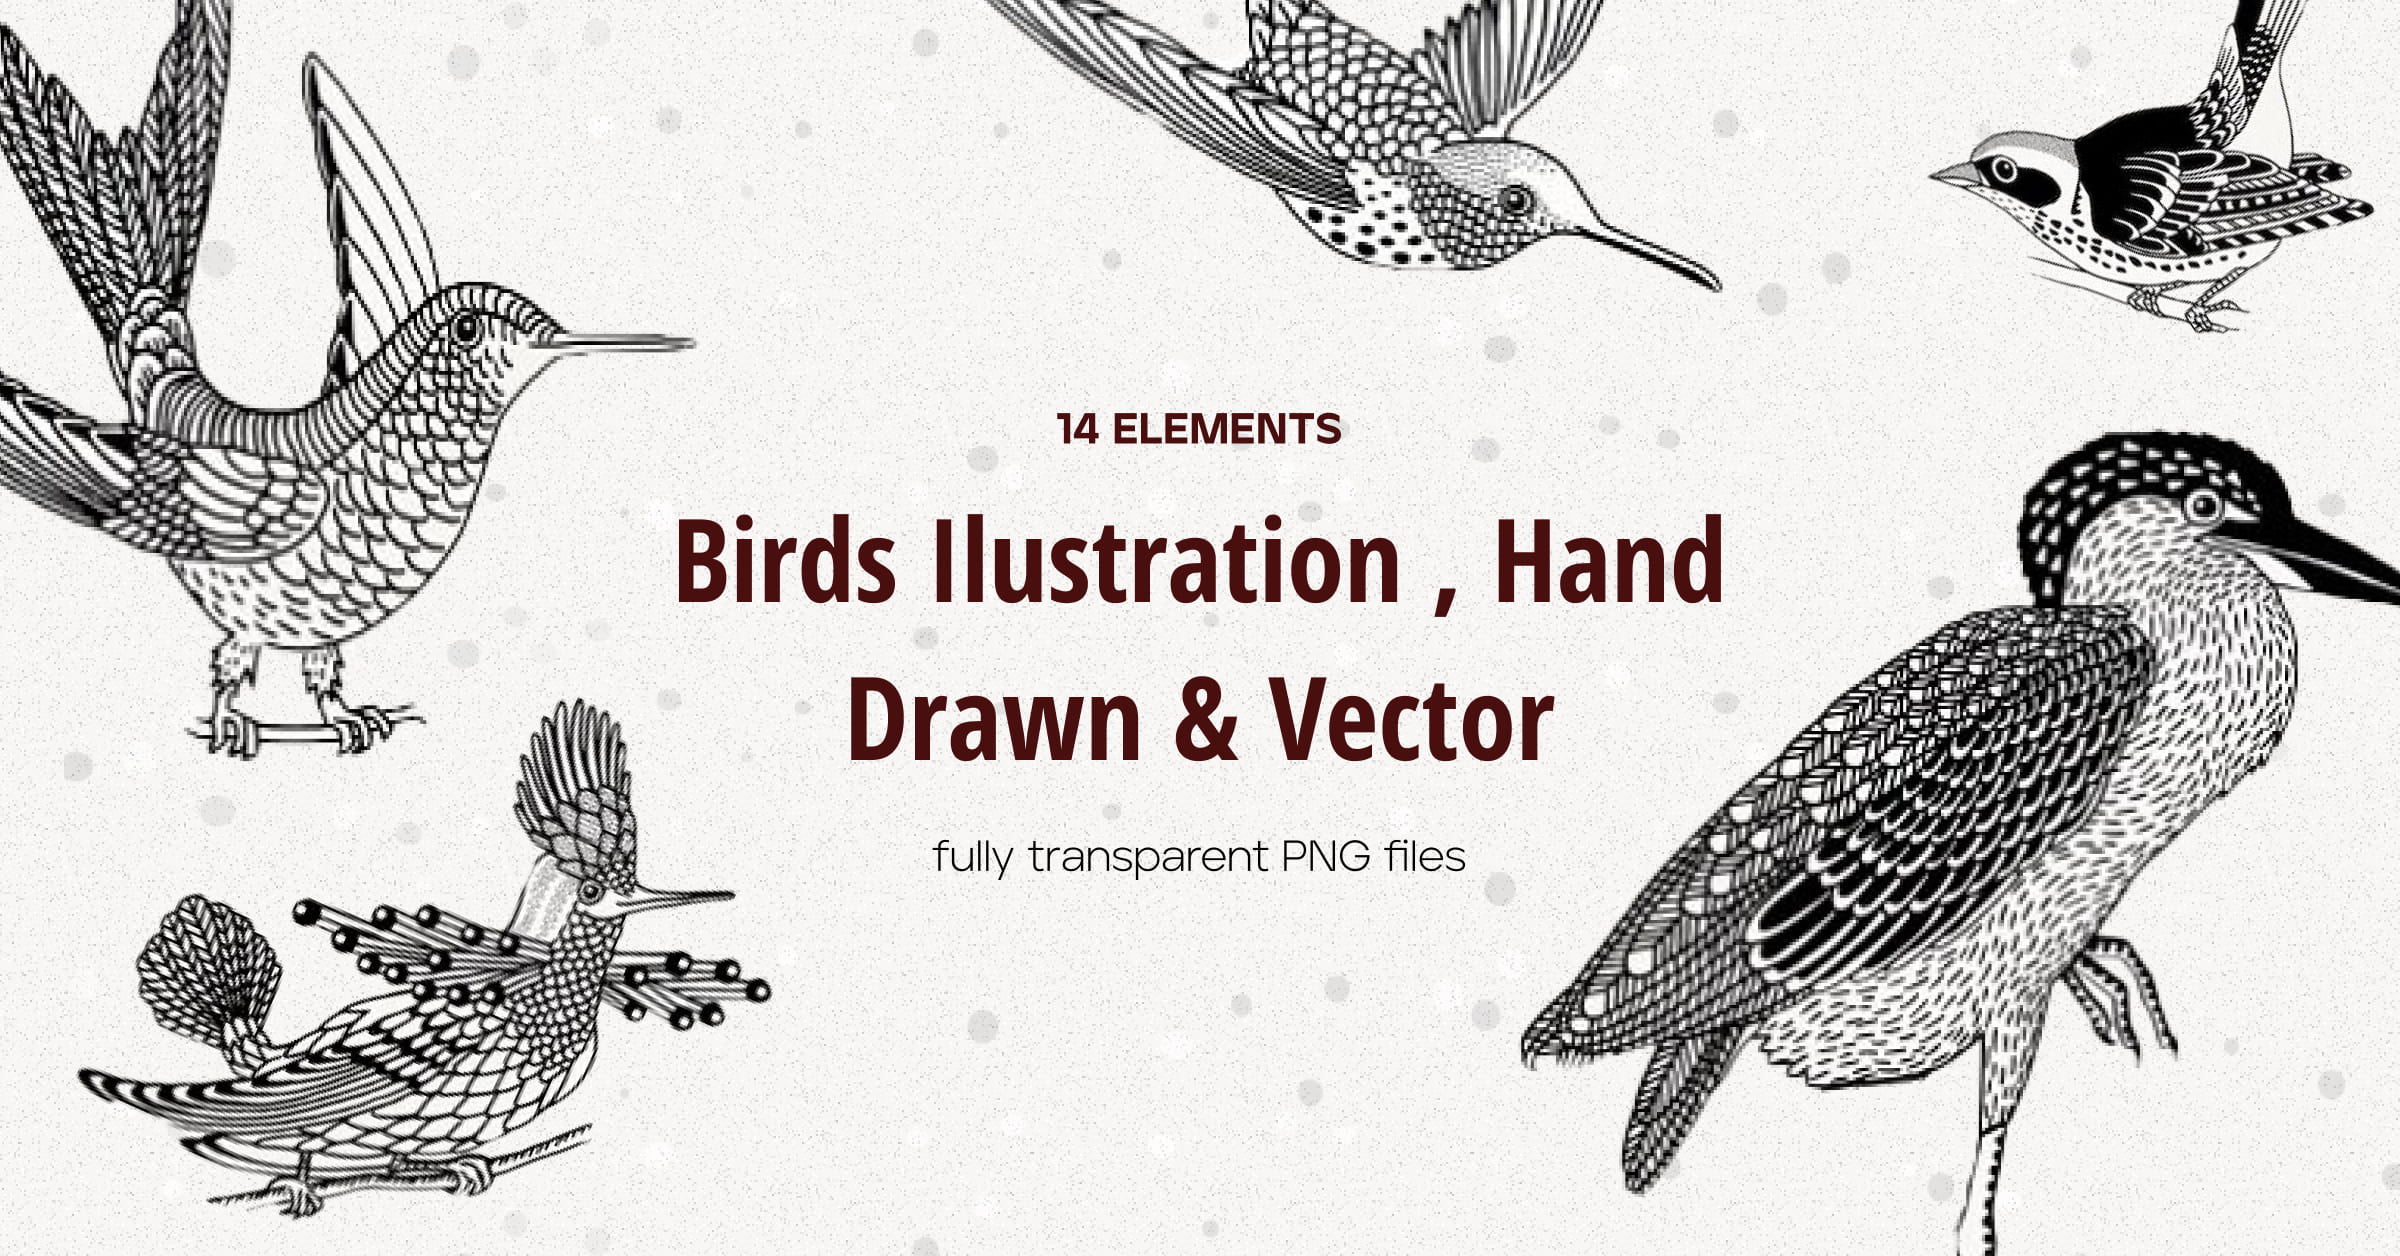 Hand drawn illustrations of birds - Facebook page preview.